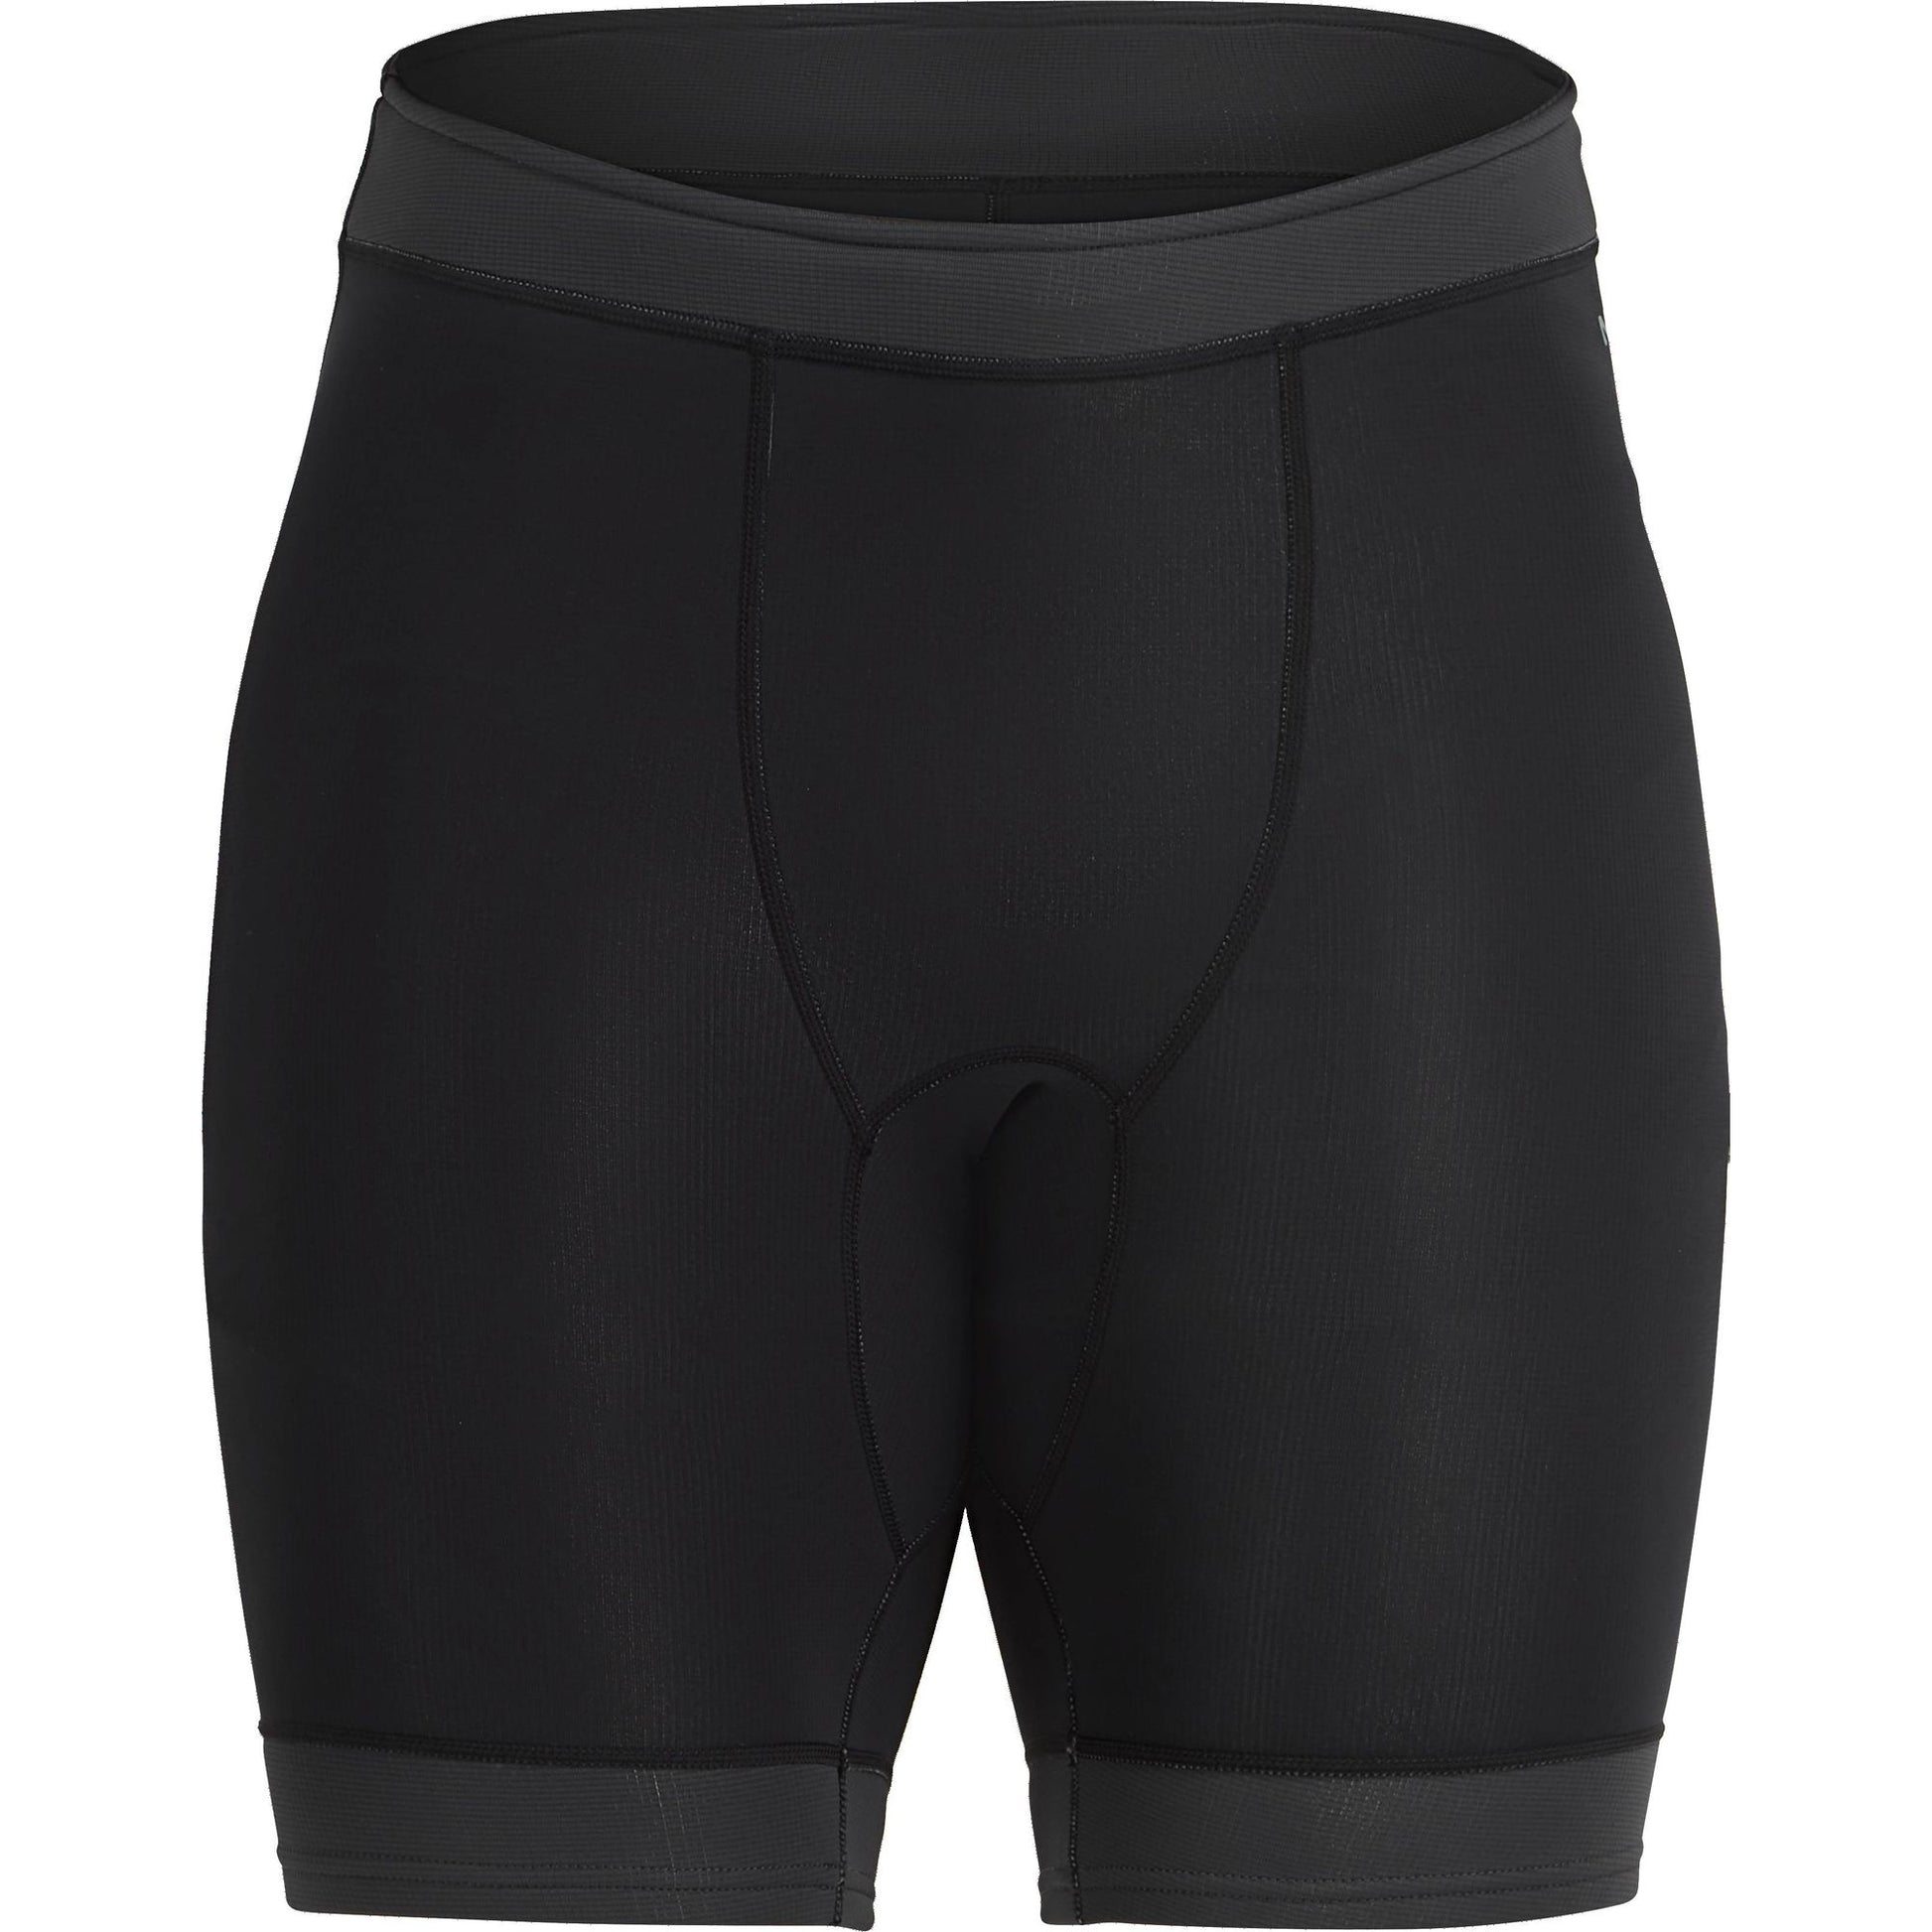 The men's black cycling shorts, part of the layering arsenal for insulating NRS Hydroskin 0.5 Shorts - Men's.